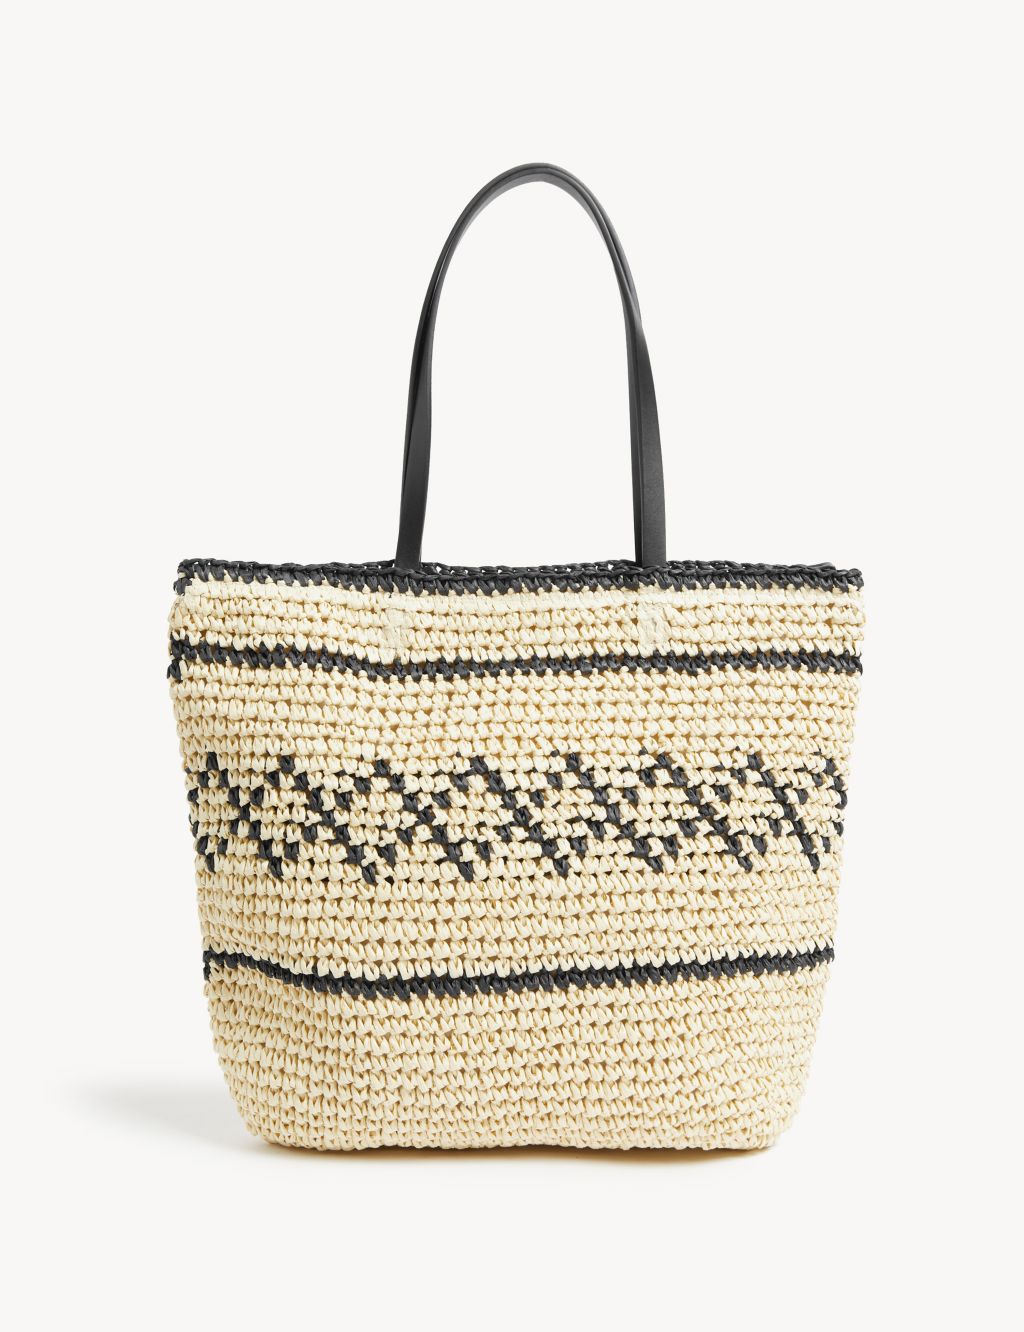 Straw Woven Tote Bag image 1